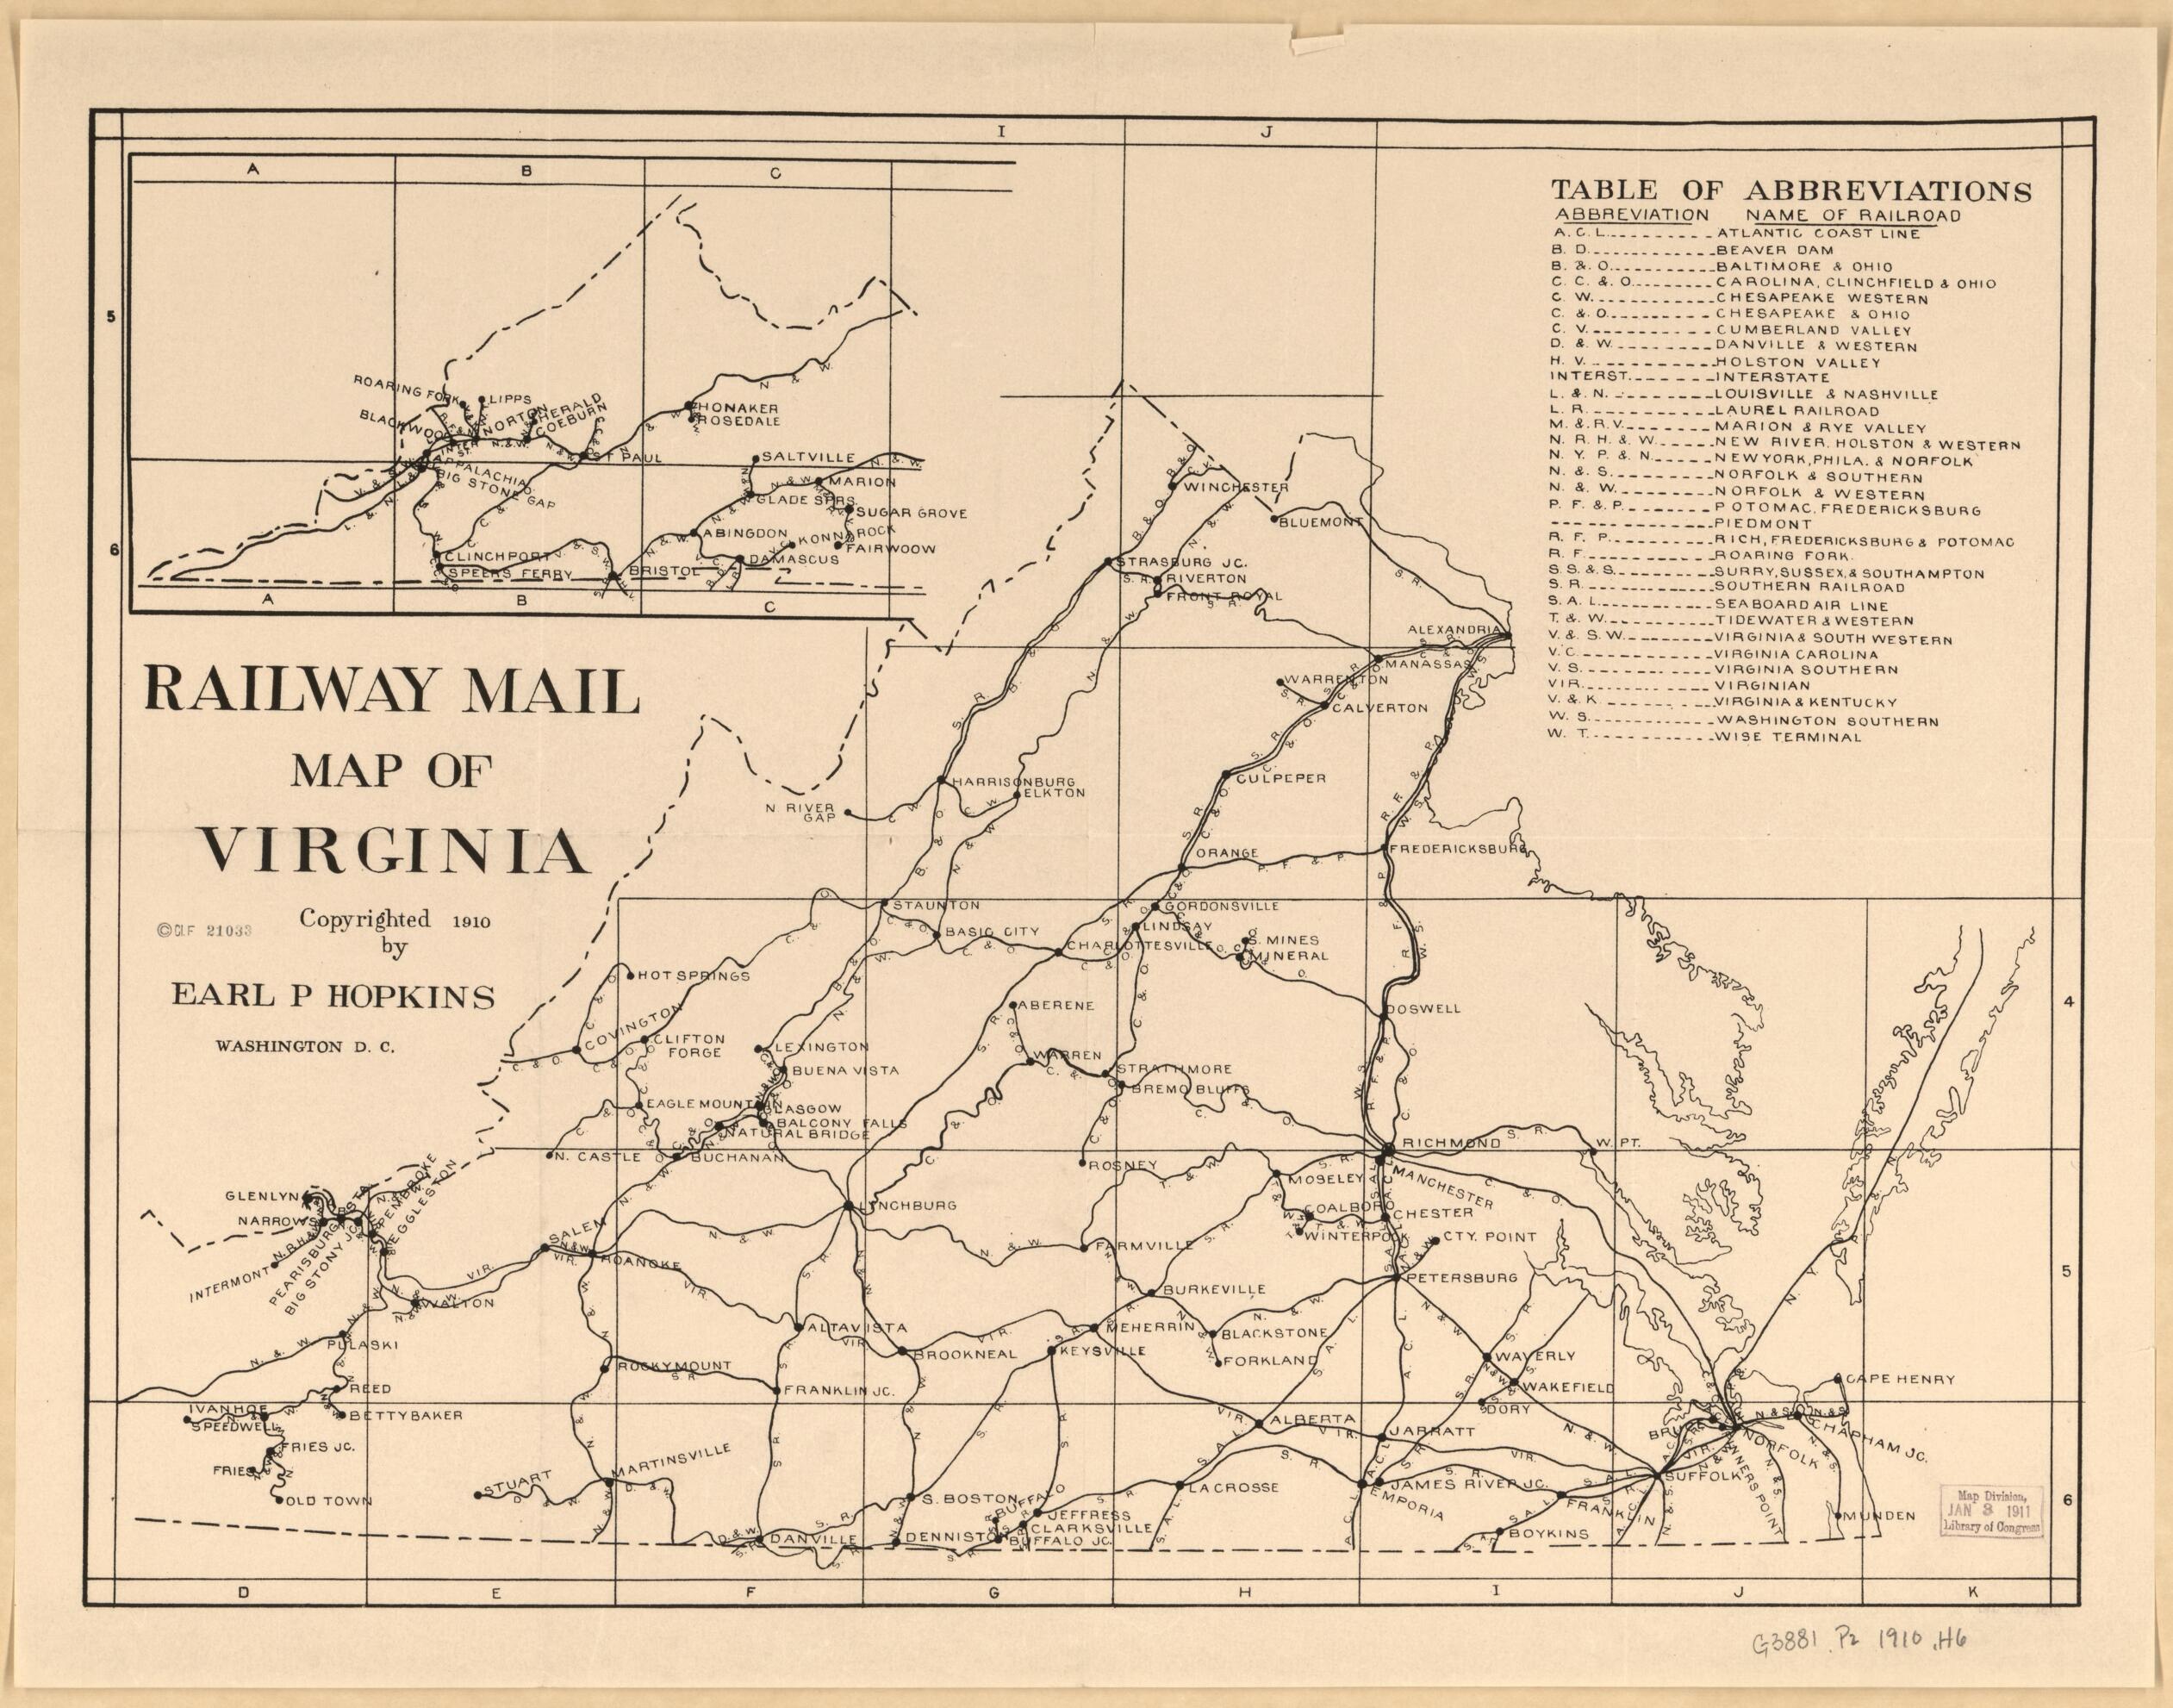 This old map of Railway Mail Map of Virginia from 1910 was created by Earl P. (Earl Palmer) Hopkins in 1910